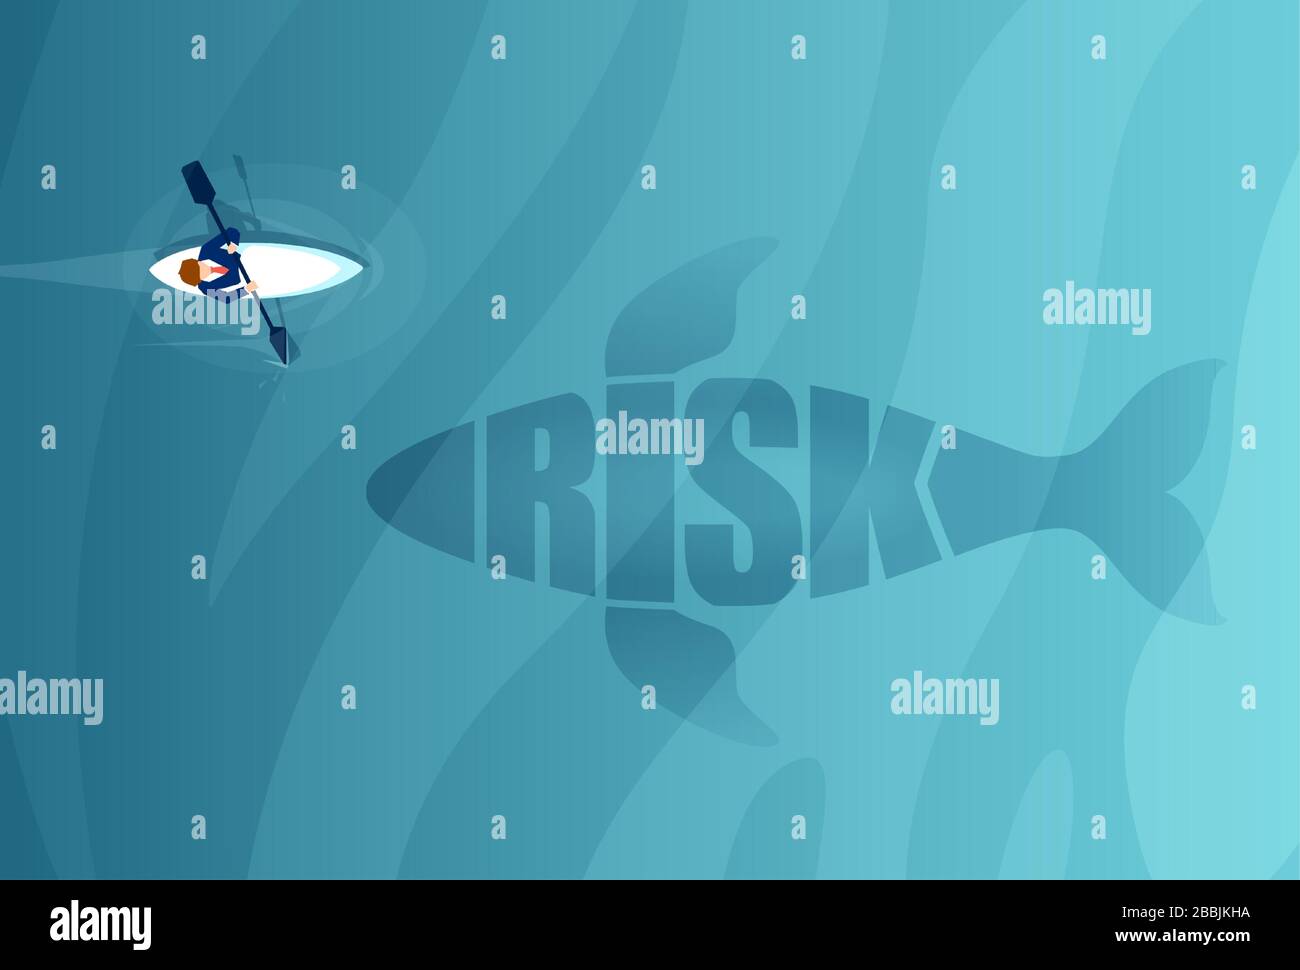 Risk management and difficul times concept. Vector of a man in a small boat floats next to a big shark or whale. Stock Vector